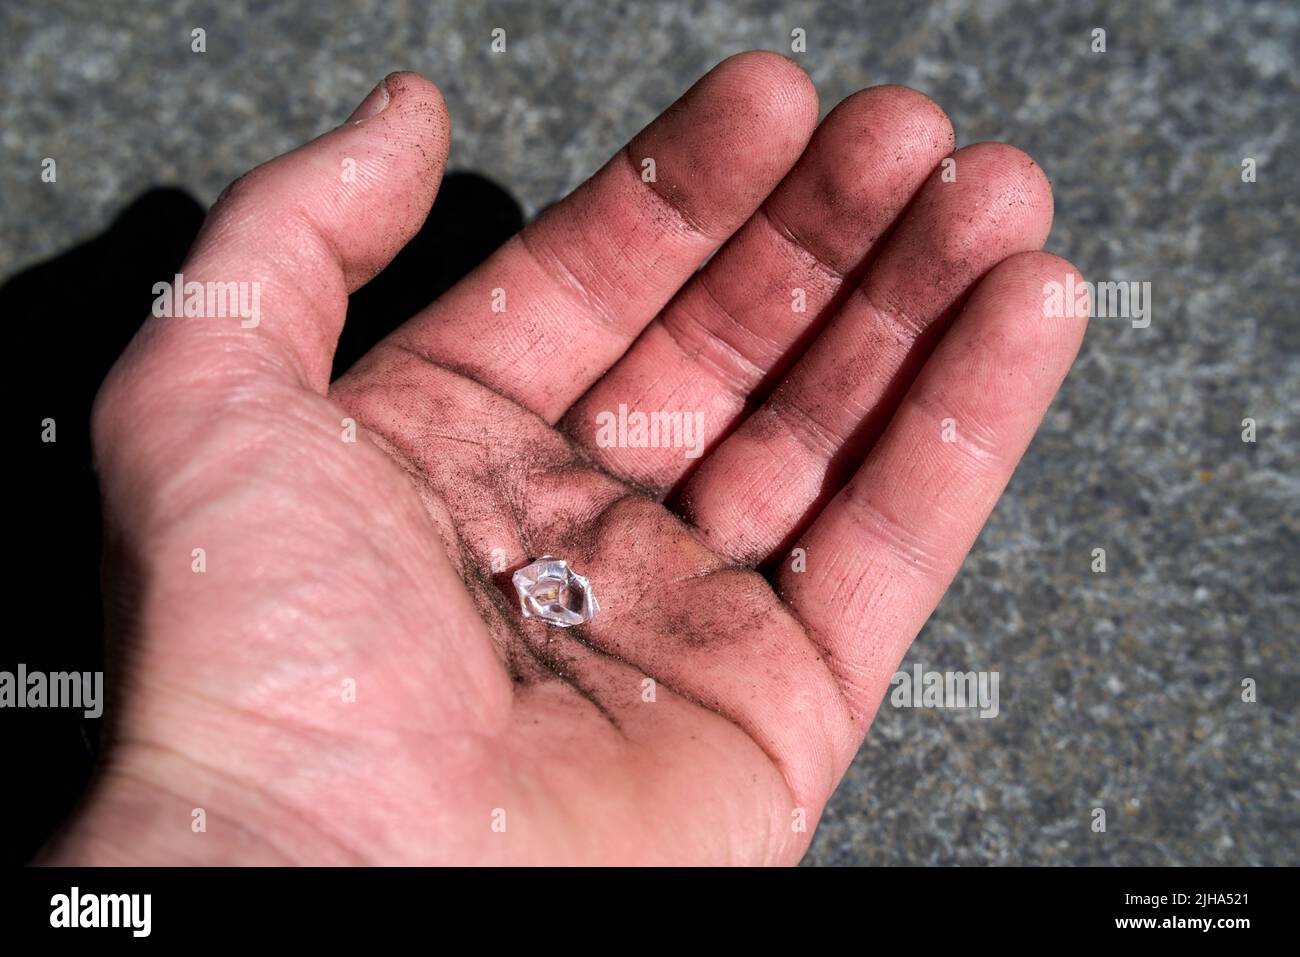 Hand with a simulated diamond pretending to have been found on earth Stock Photo